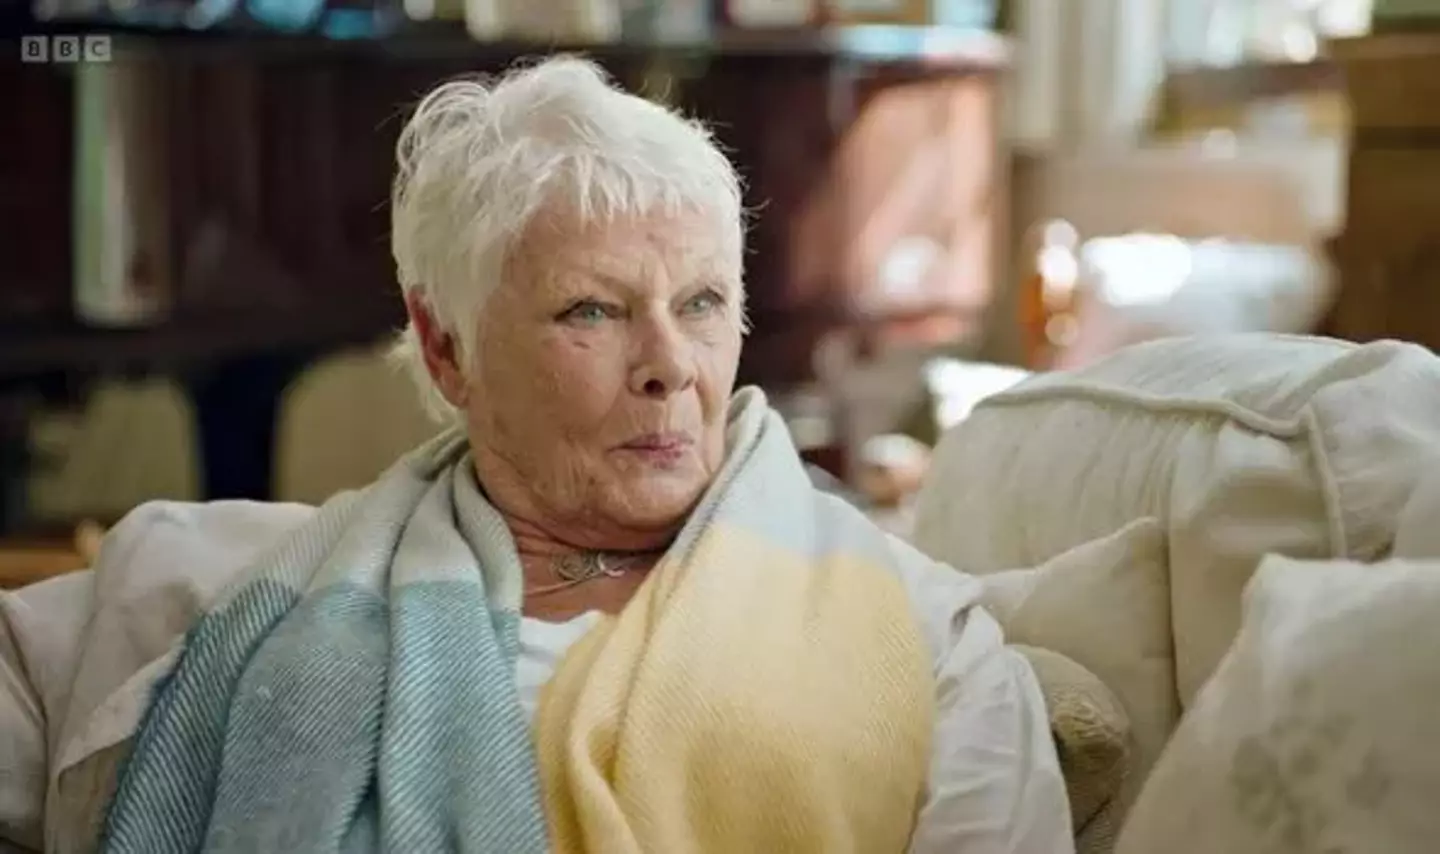 Dame Judi was less than impressed with Theroux’s question.